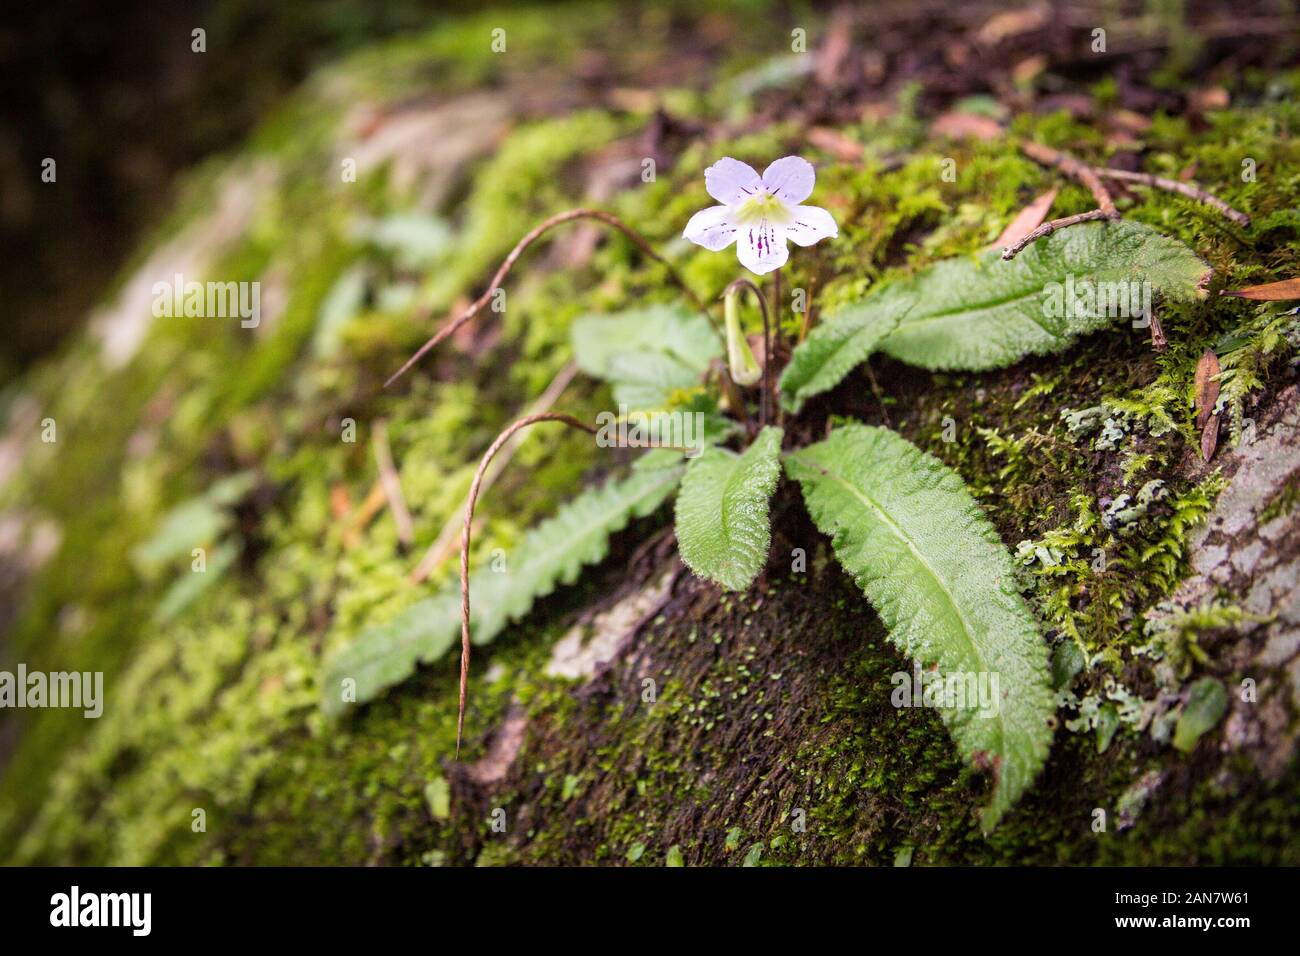 Little white flower growing on top of a mossy rock, Drakensberg, South Africa Stock Photo